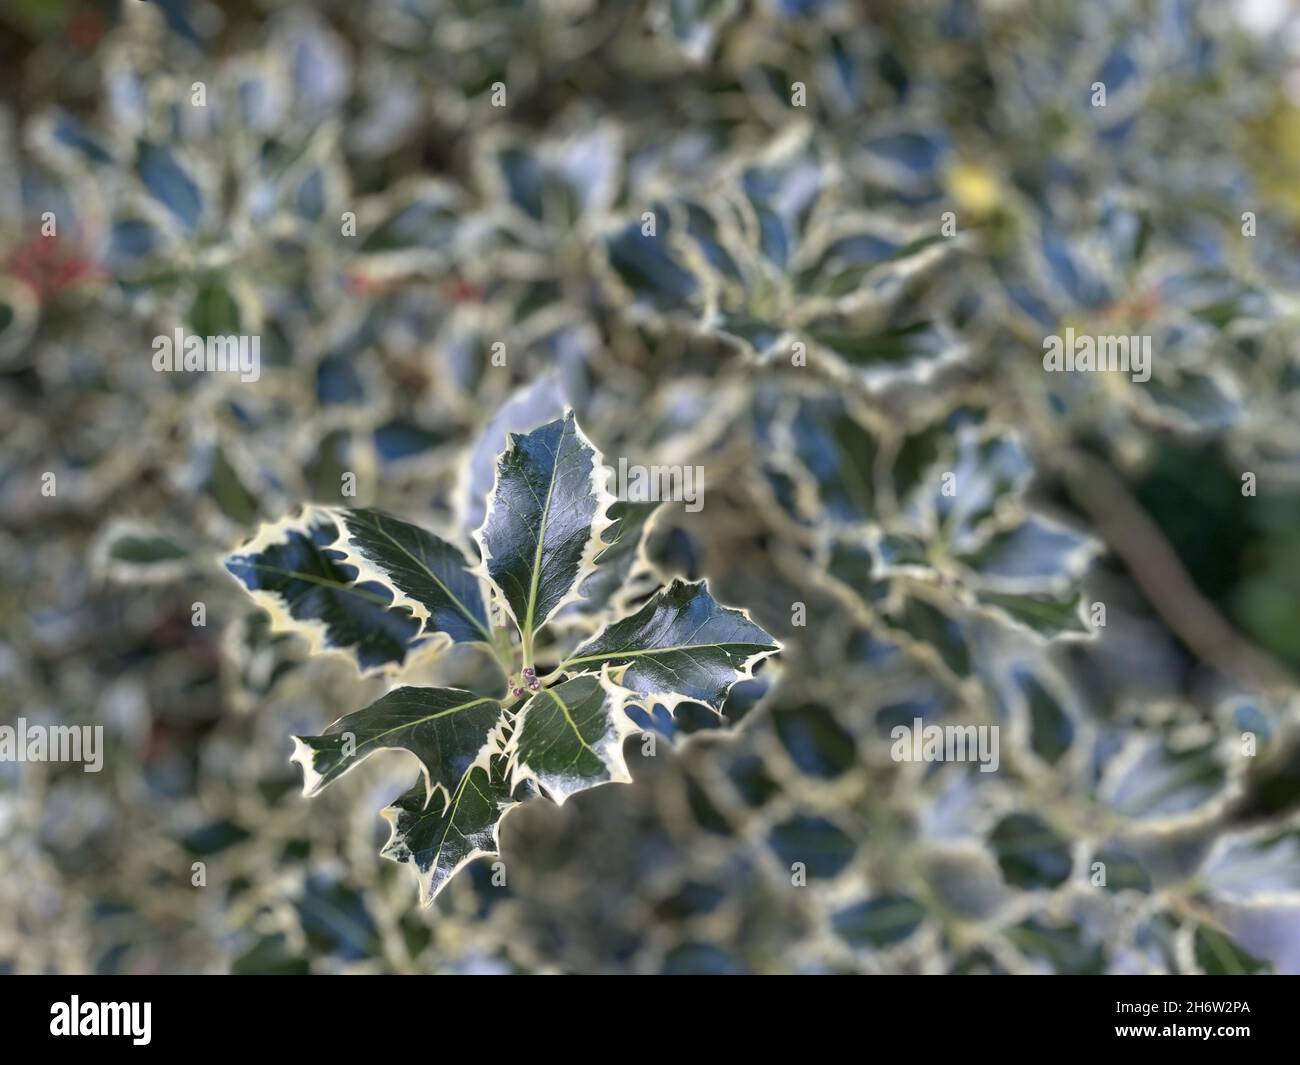 Close-up shot of a common holly plant leaves. Stock Photo